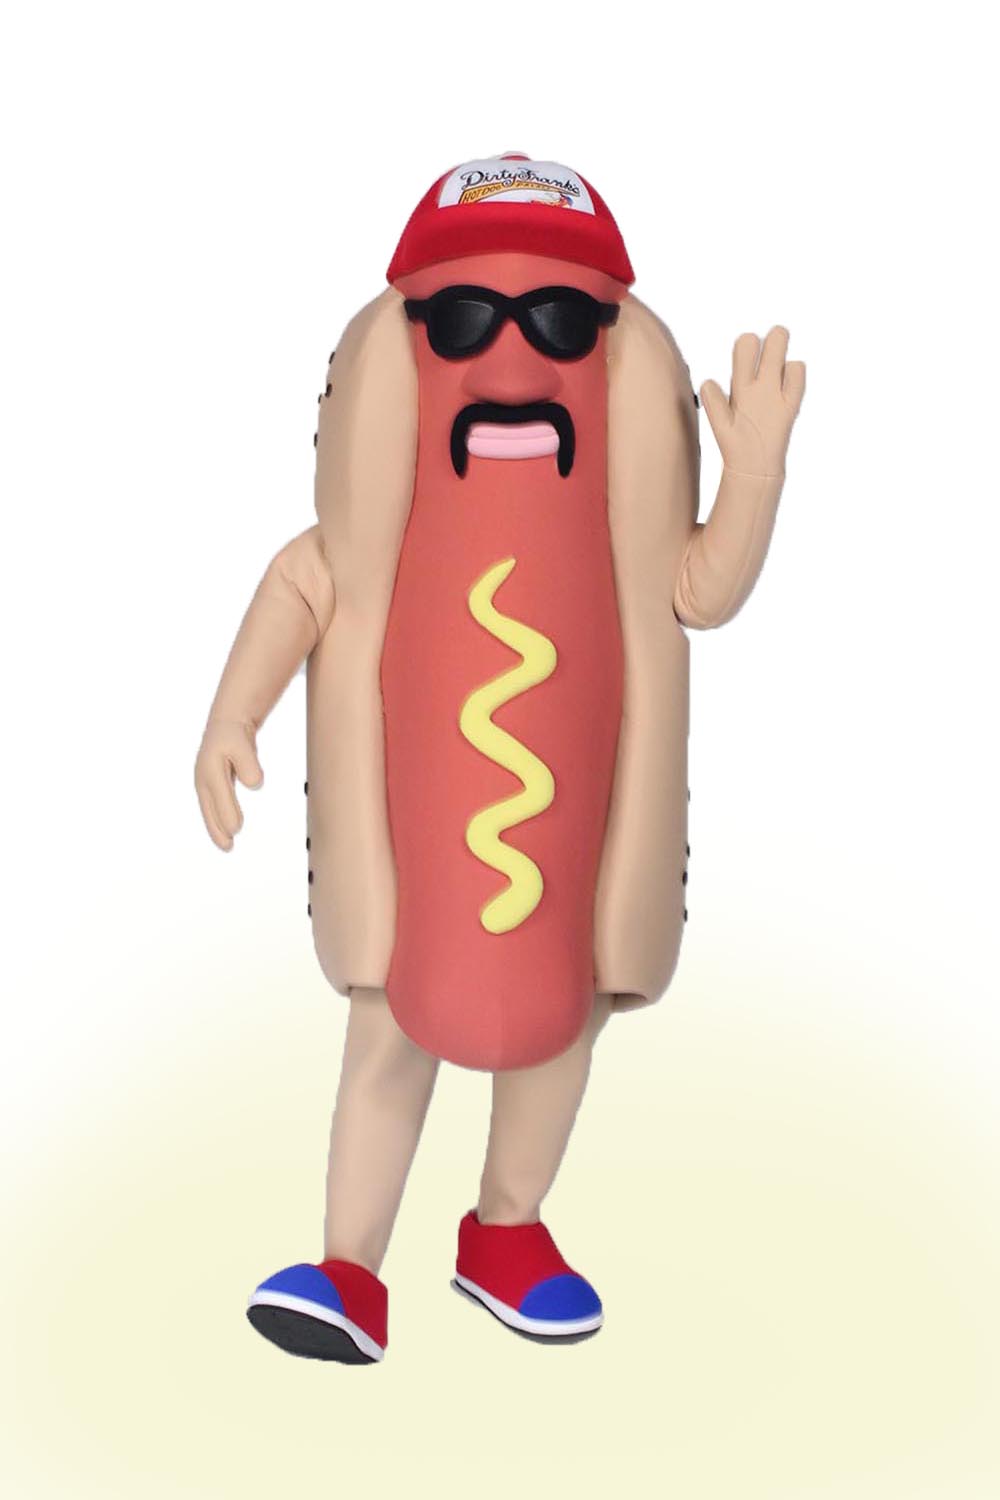 Hot Dog Custom Mascot by Costume Specialists for Dirty Franks Hot Dogs